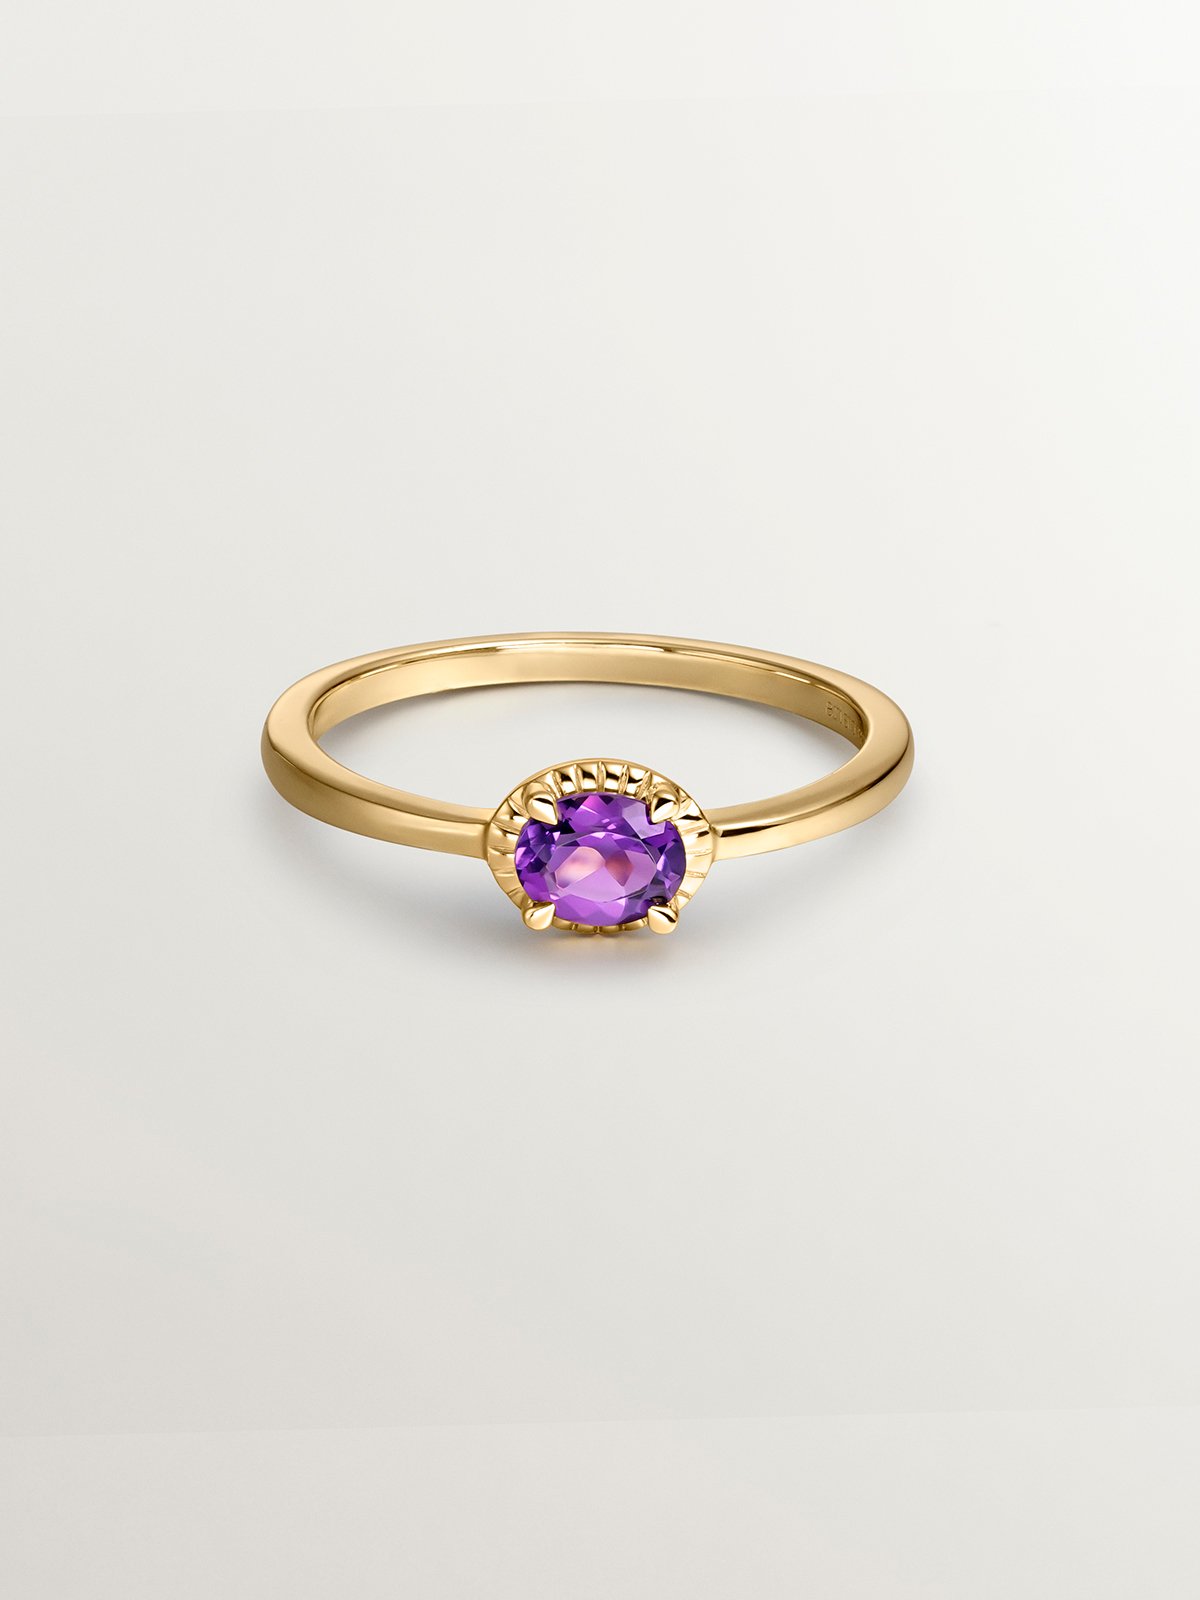 925 Silver ring bathed in 18K yellow gold with purple amethyst stone.